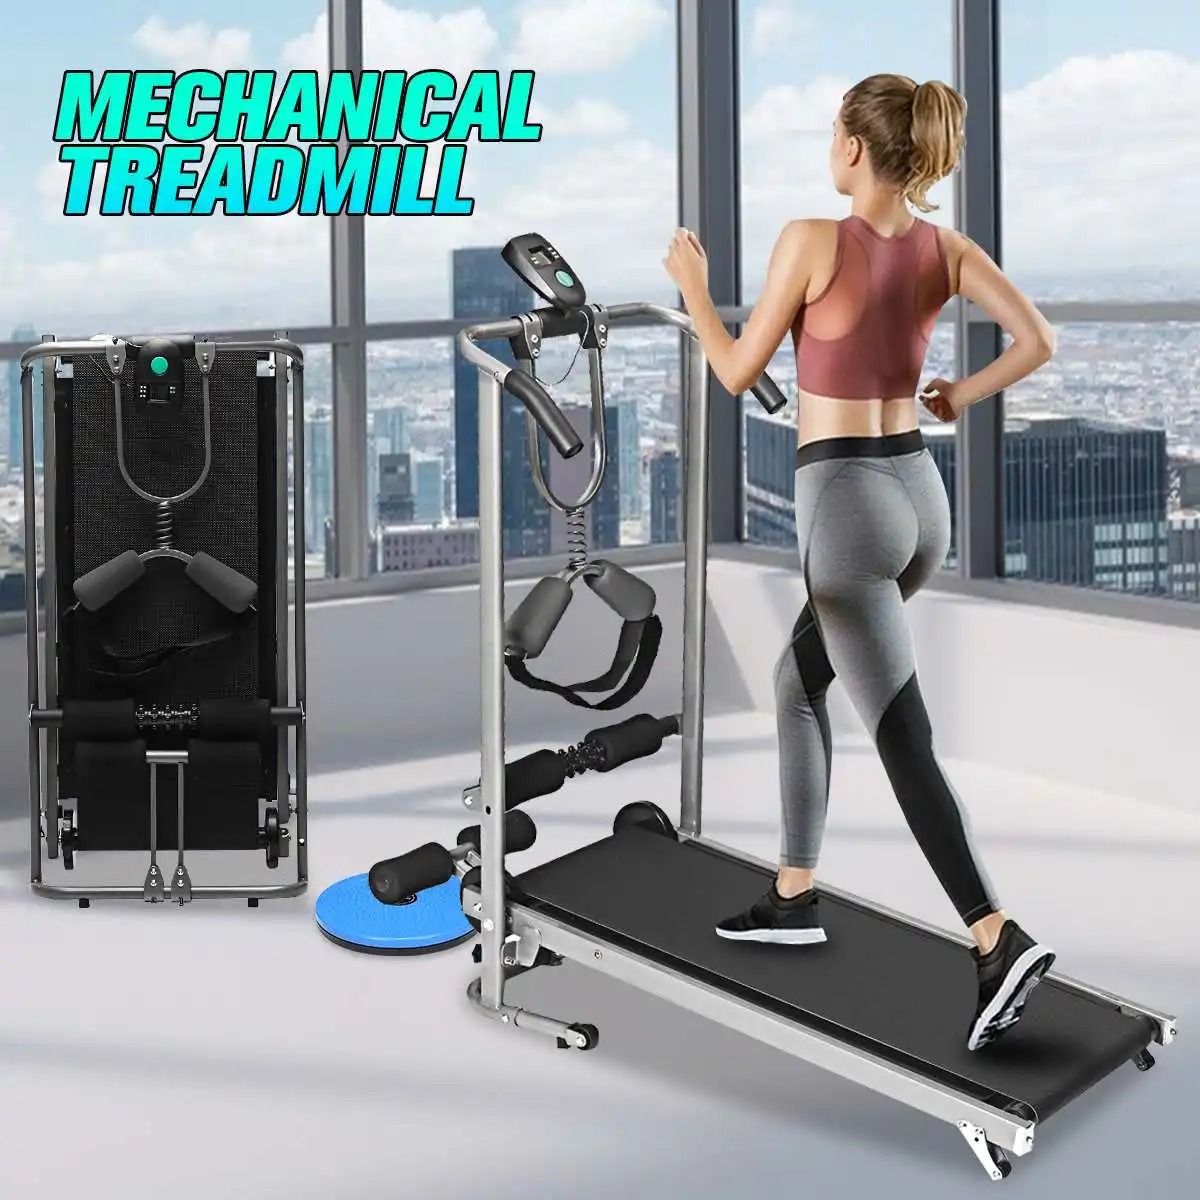 Folding Manual Walking Treadmill Machine Cardio Fitness Exercise W/LCD Display A 